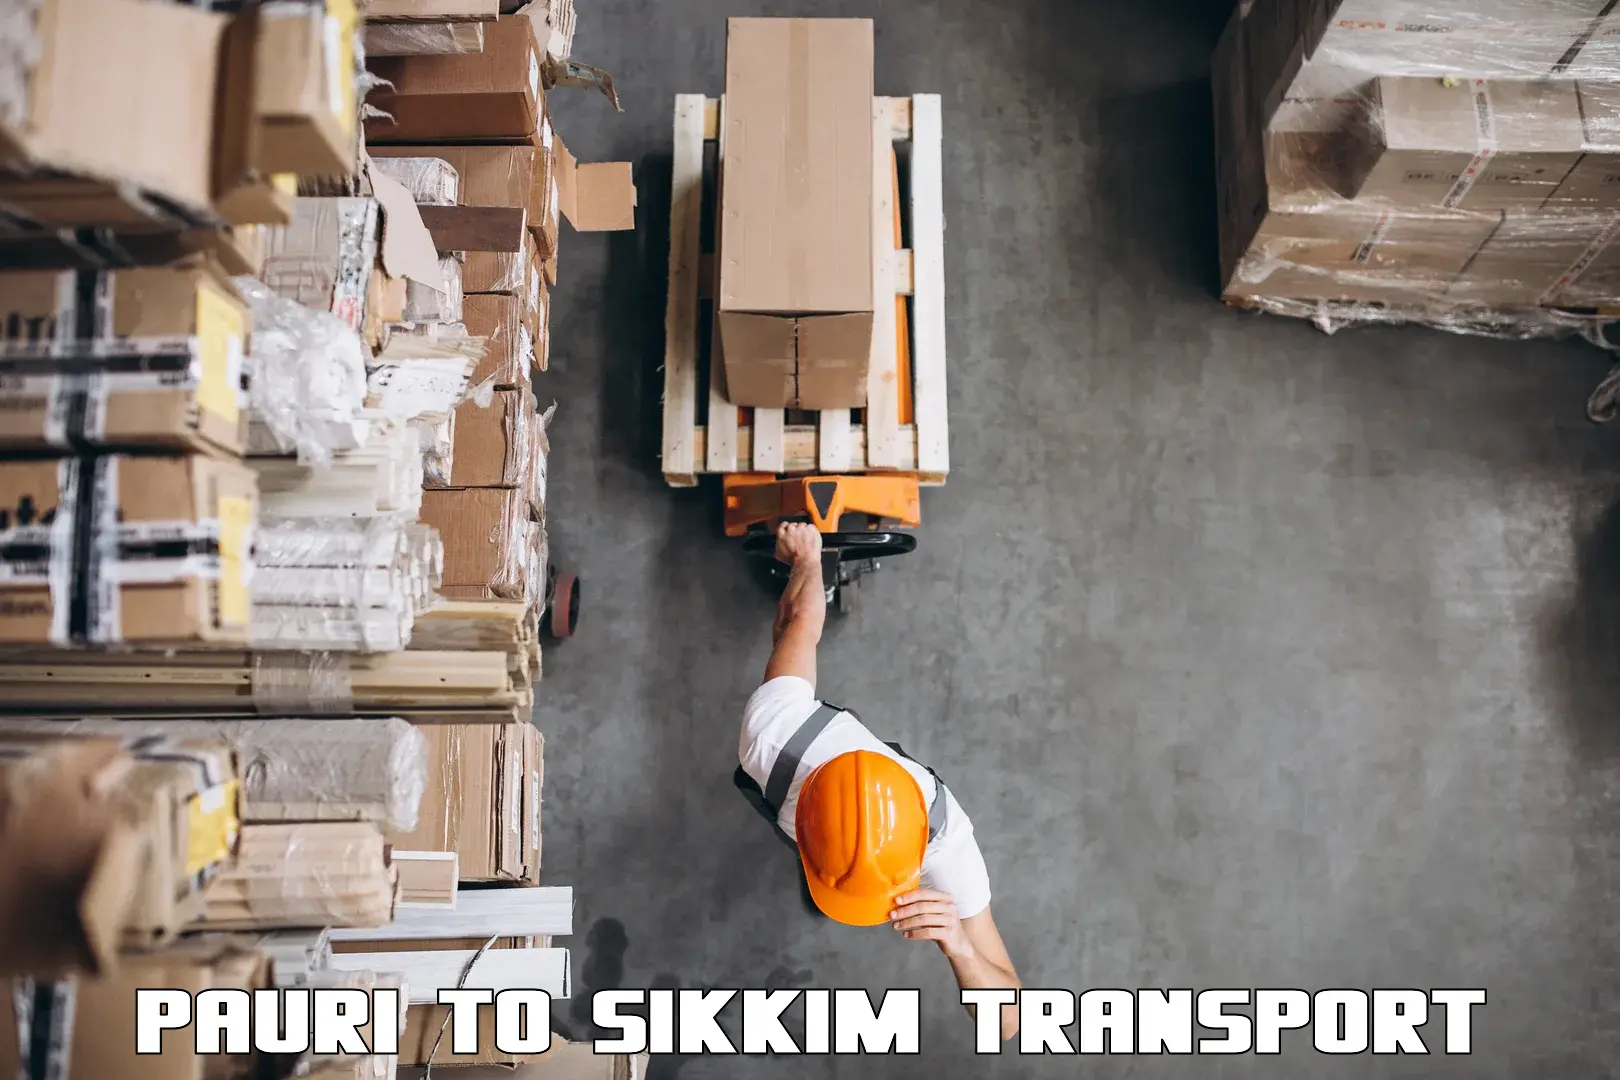 Delivery service Pauri to Sikkim